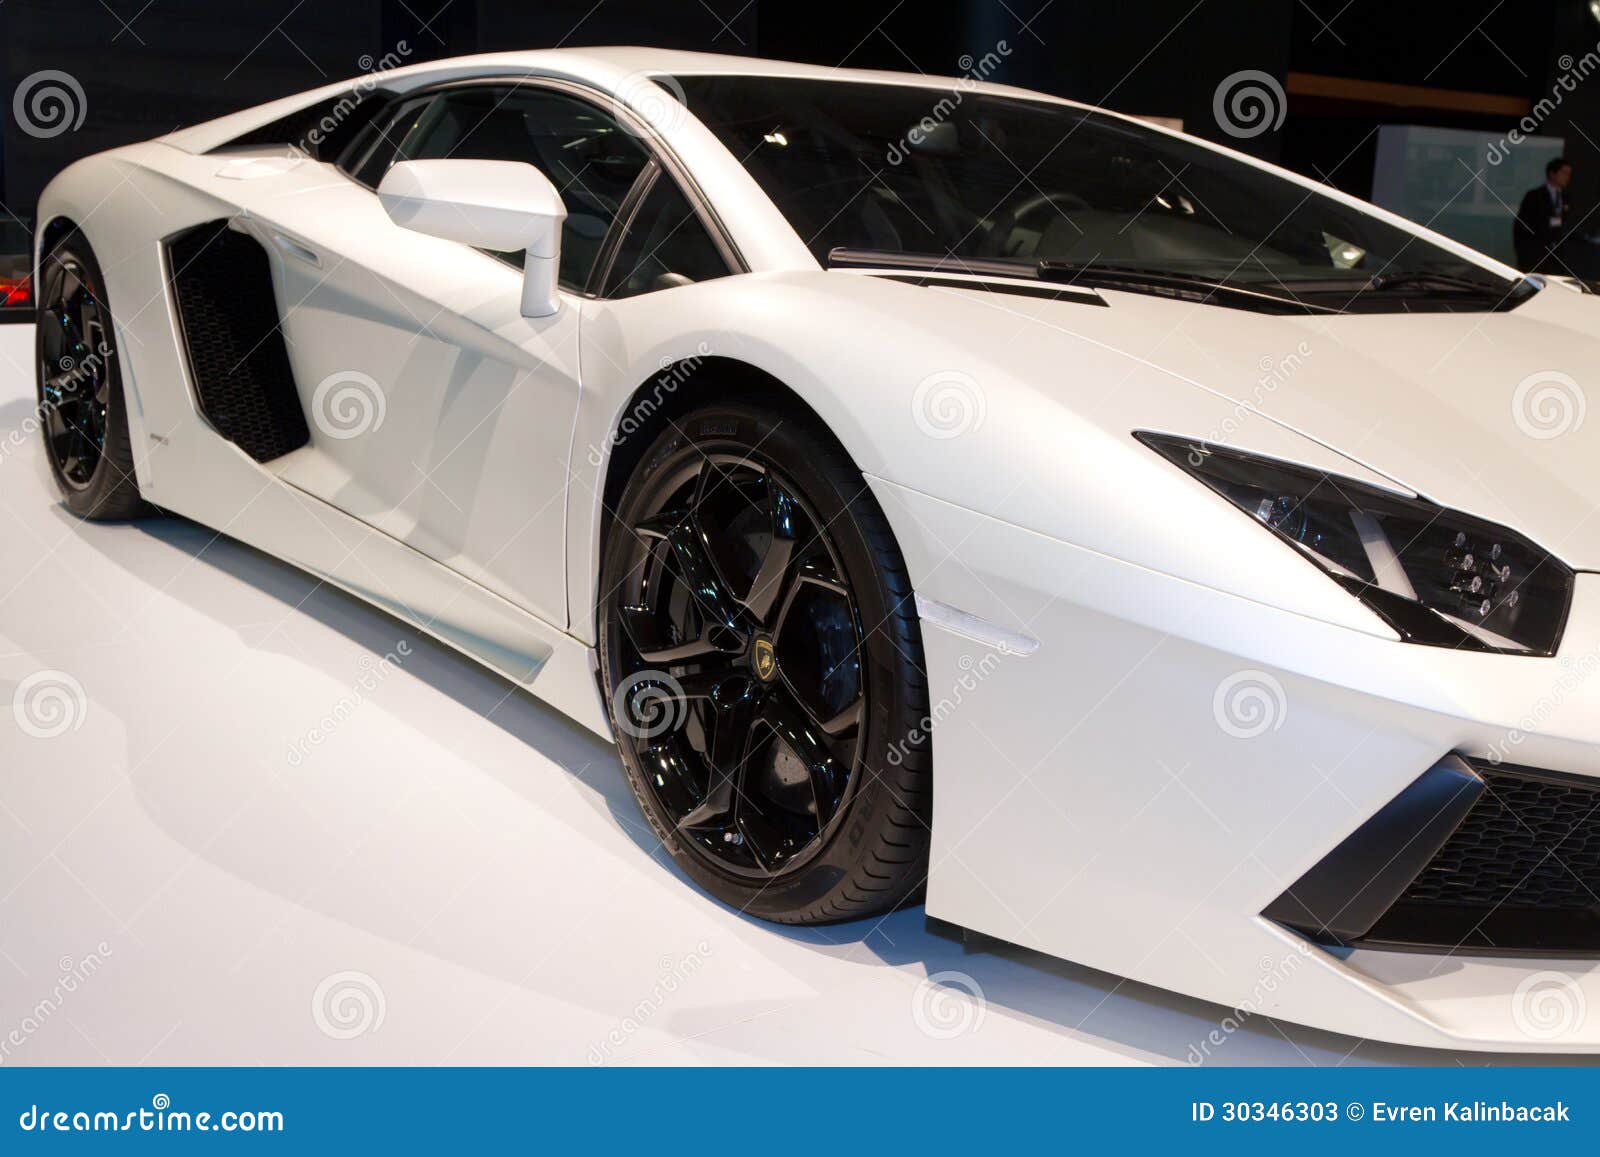 Istanbul Auto Show 2012 editorial stock photo. Image of ...